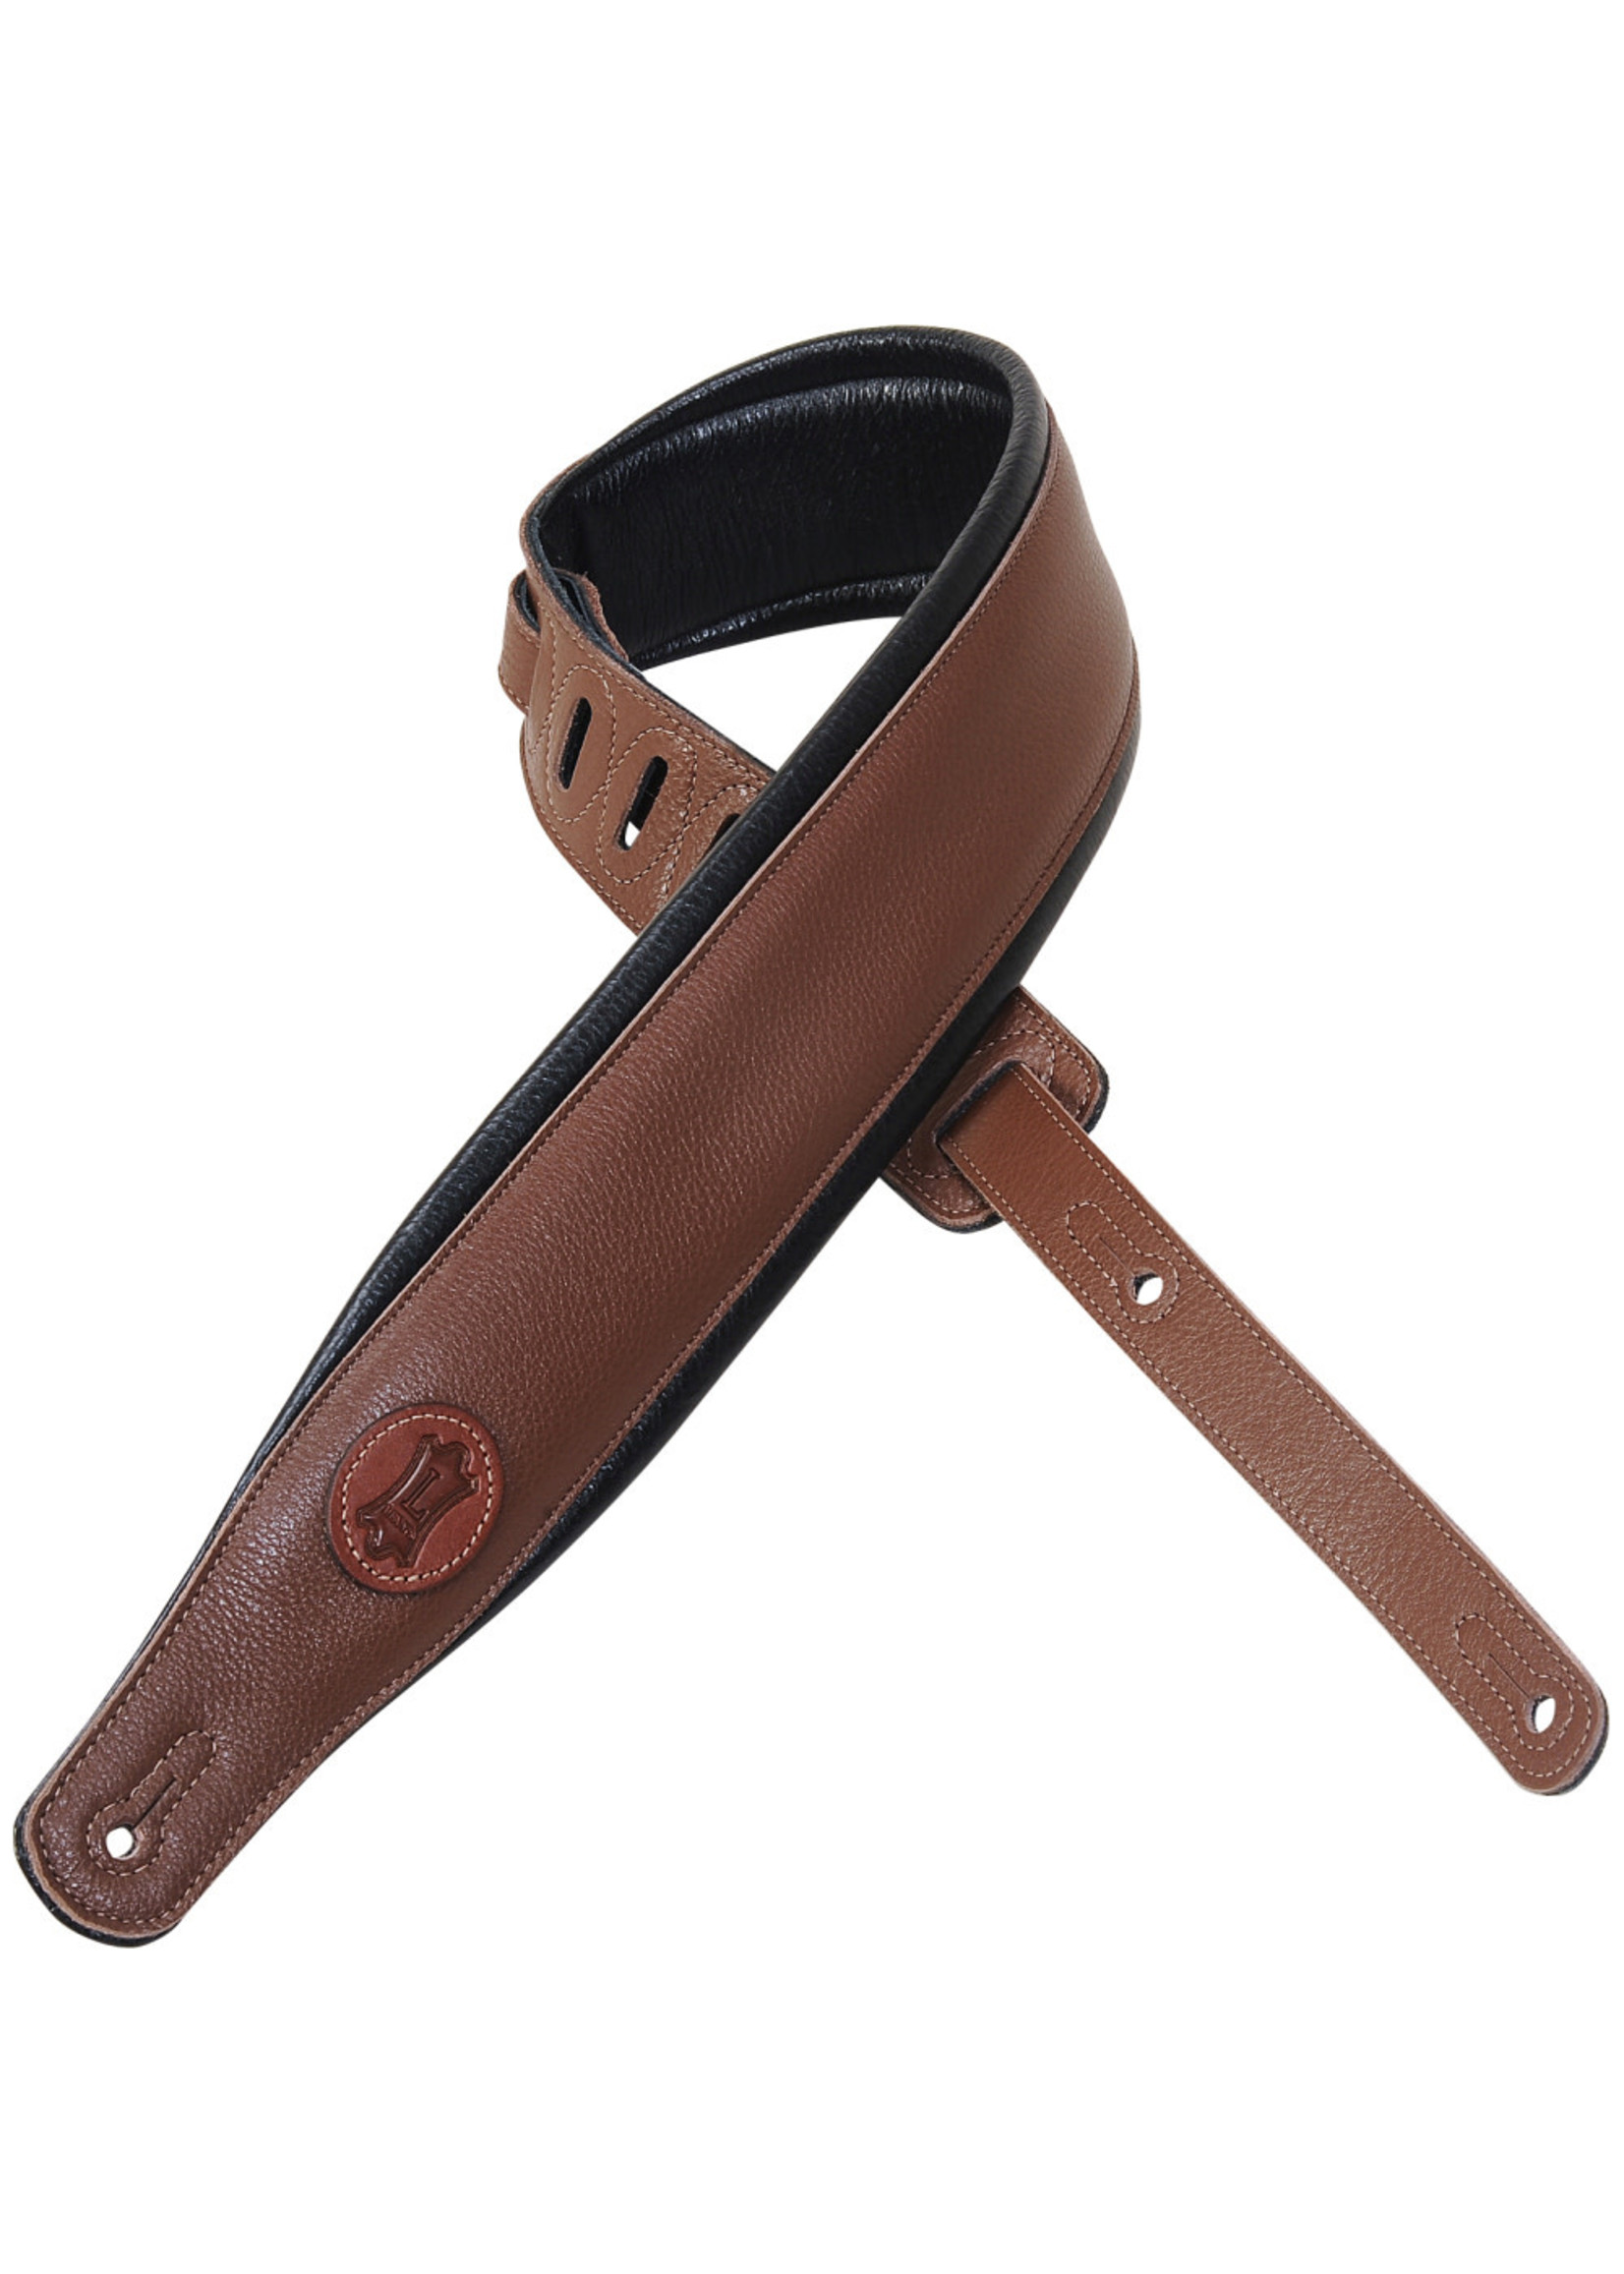 Levy's Levy's Guitar Strap 3" Signature Series Leather MSS2